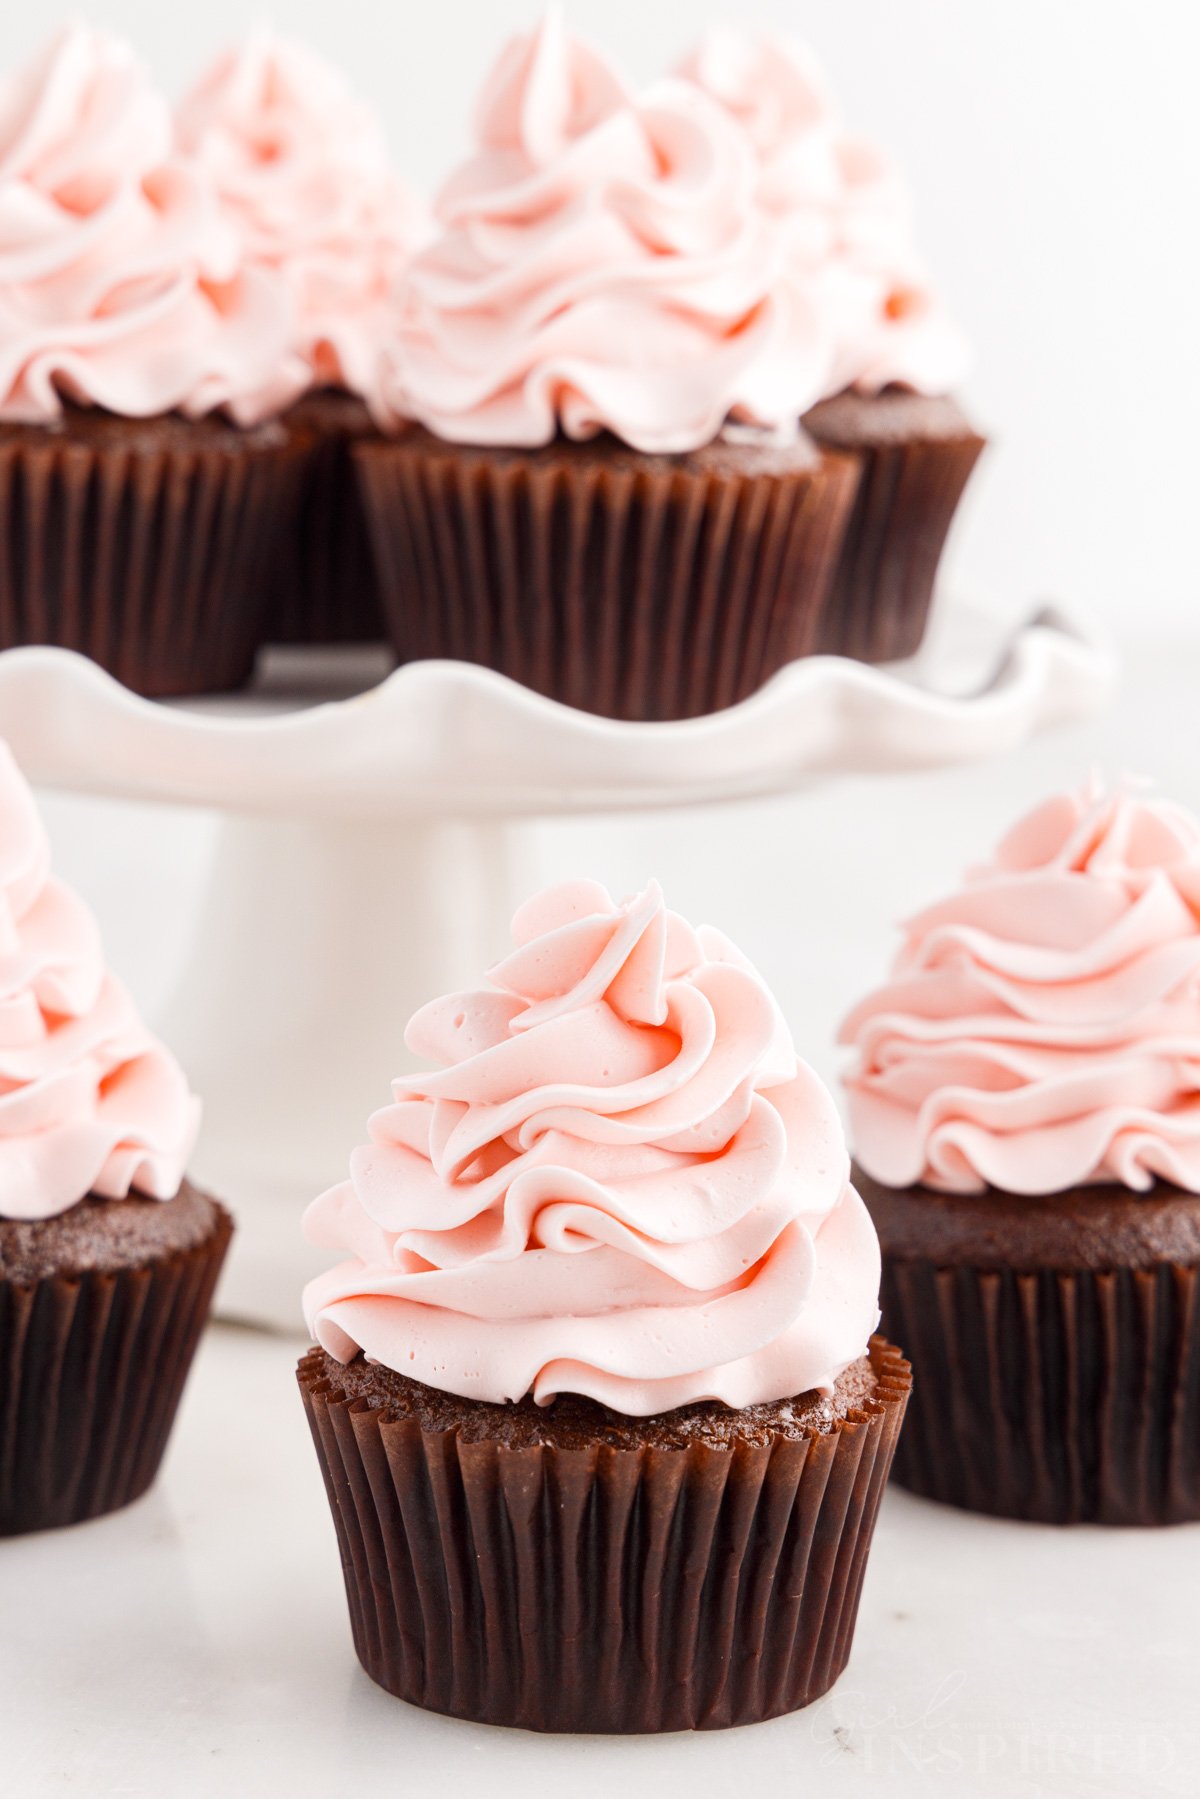 Chocolate cupcake with big swirl of pink strawberry frosting, with cake platter full of cupcakes in background.